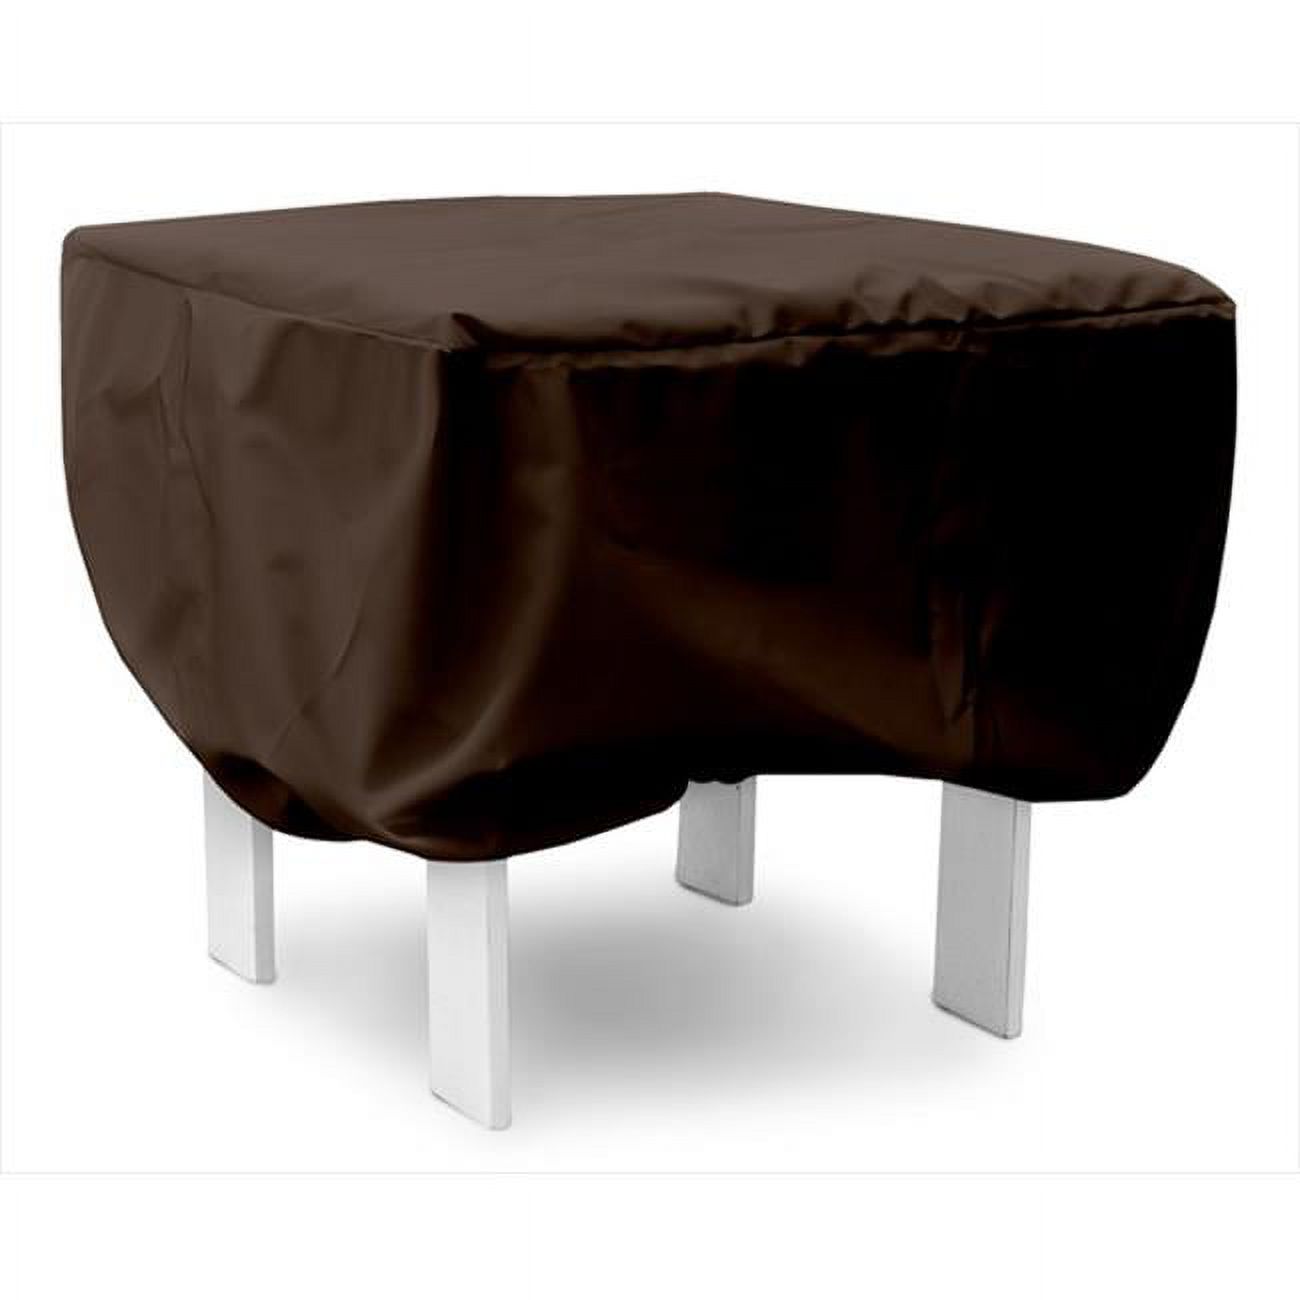 KoverRoos 94263 Weathermax 24 in. Square Table Cover, Chocolate - 24 L x 24 W x 15 H in. - image 1 of 2